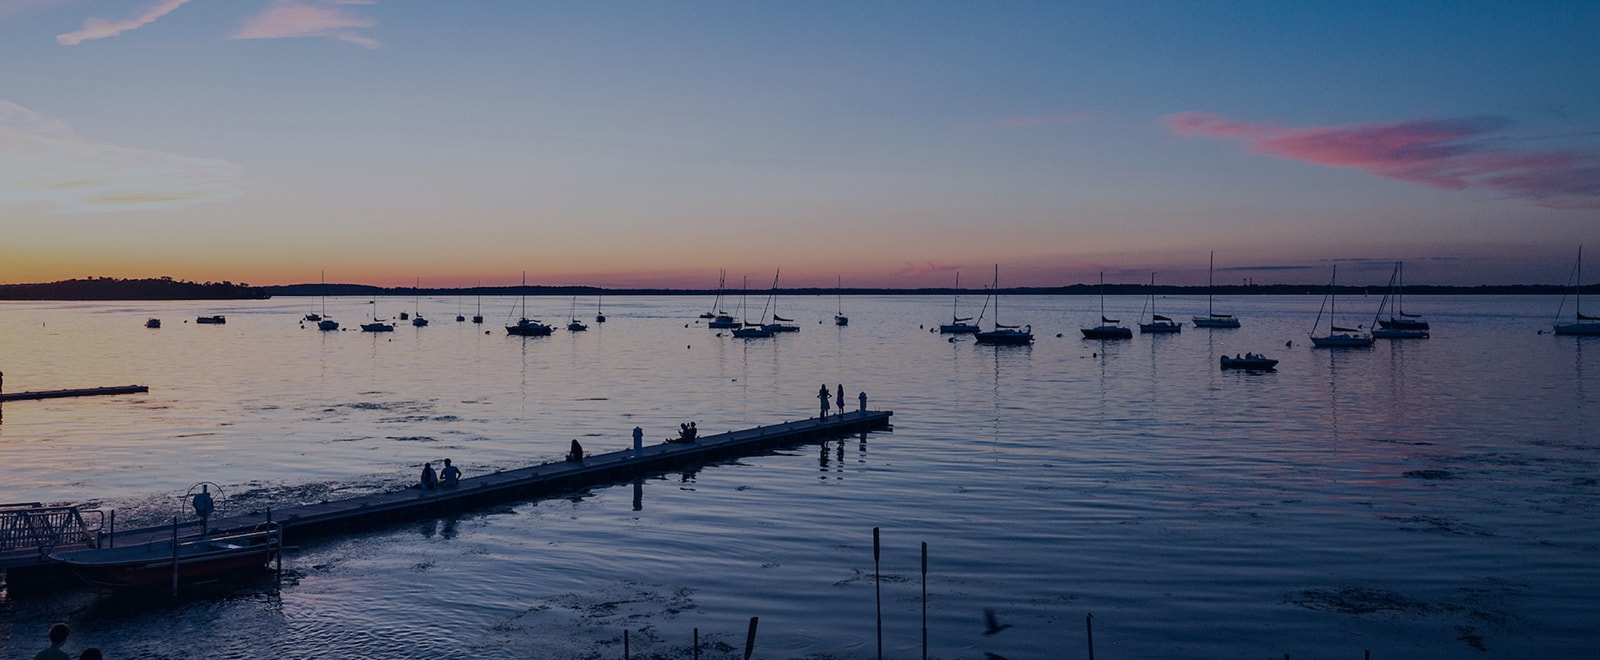 Sailboats rest at anchor on Lake Mendota under a summer evening sky as daylight fades into a palette of blues and pinks.